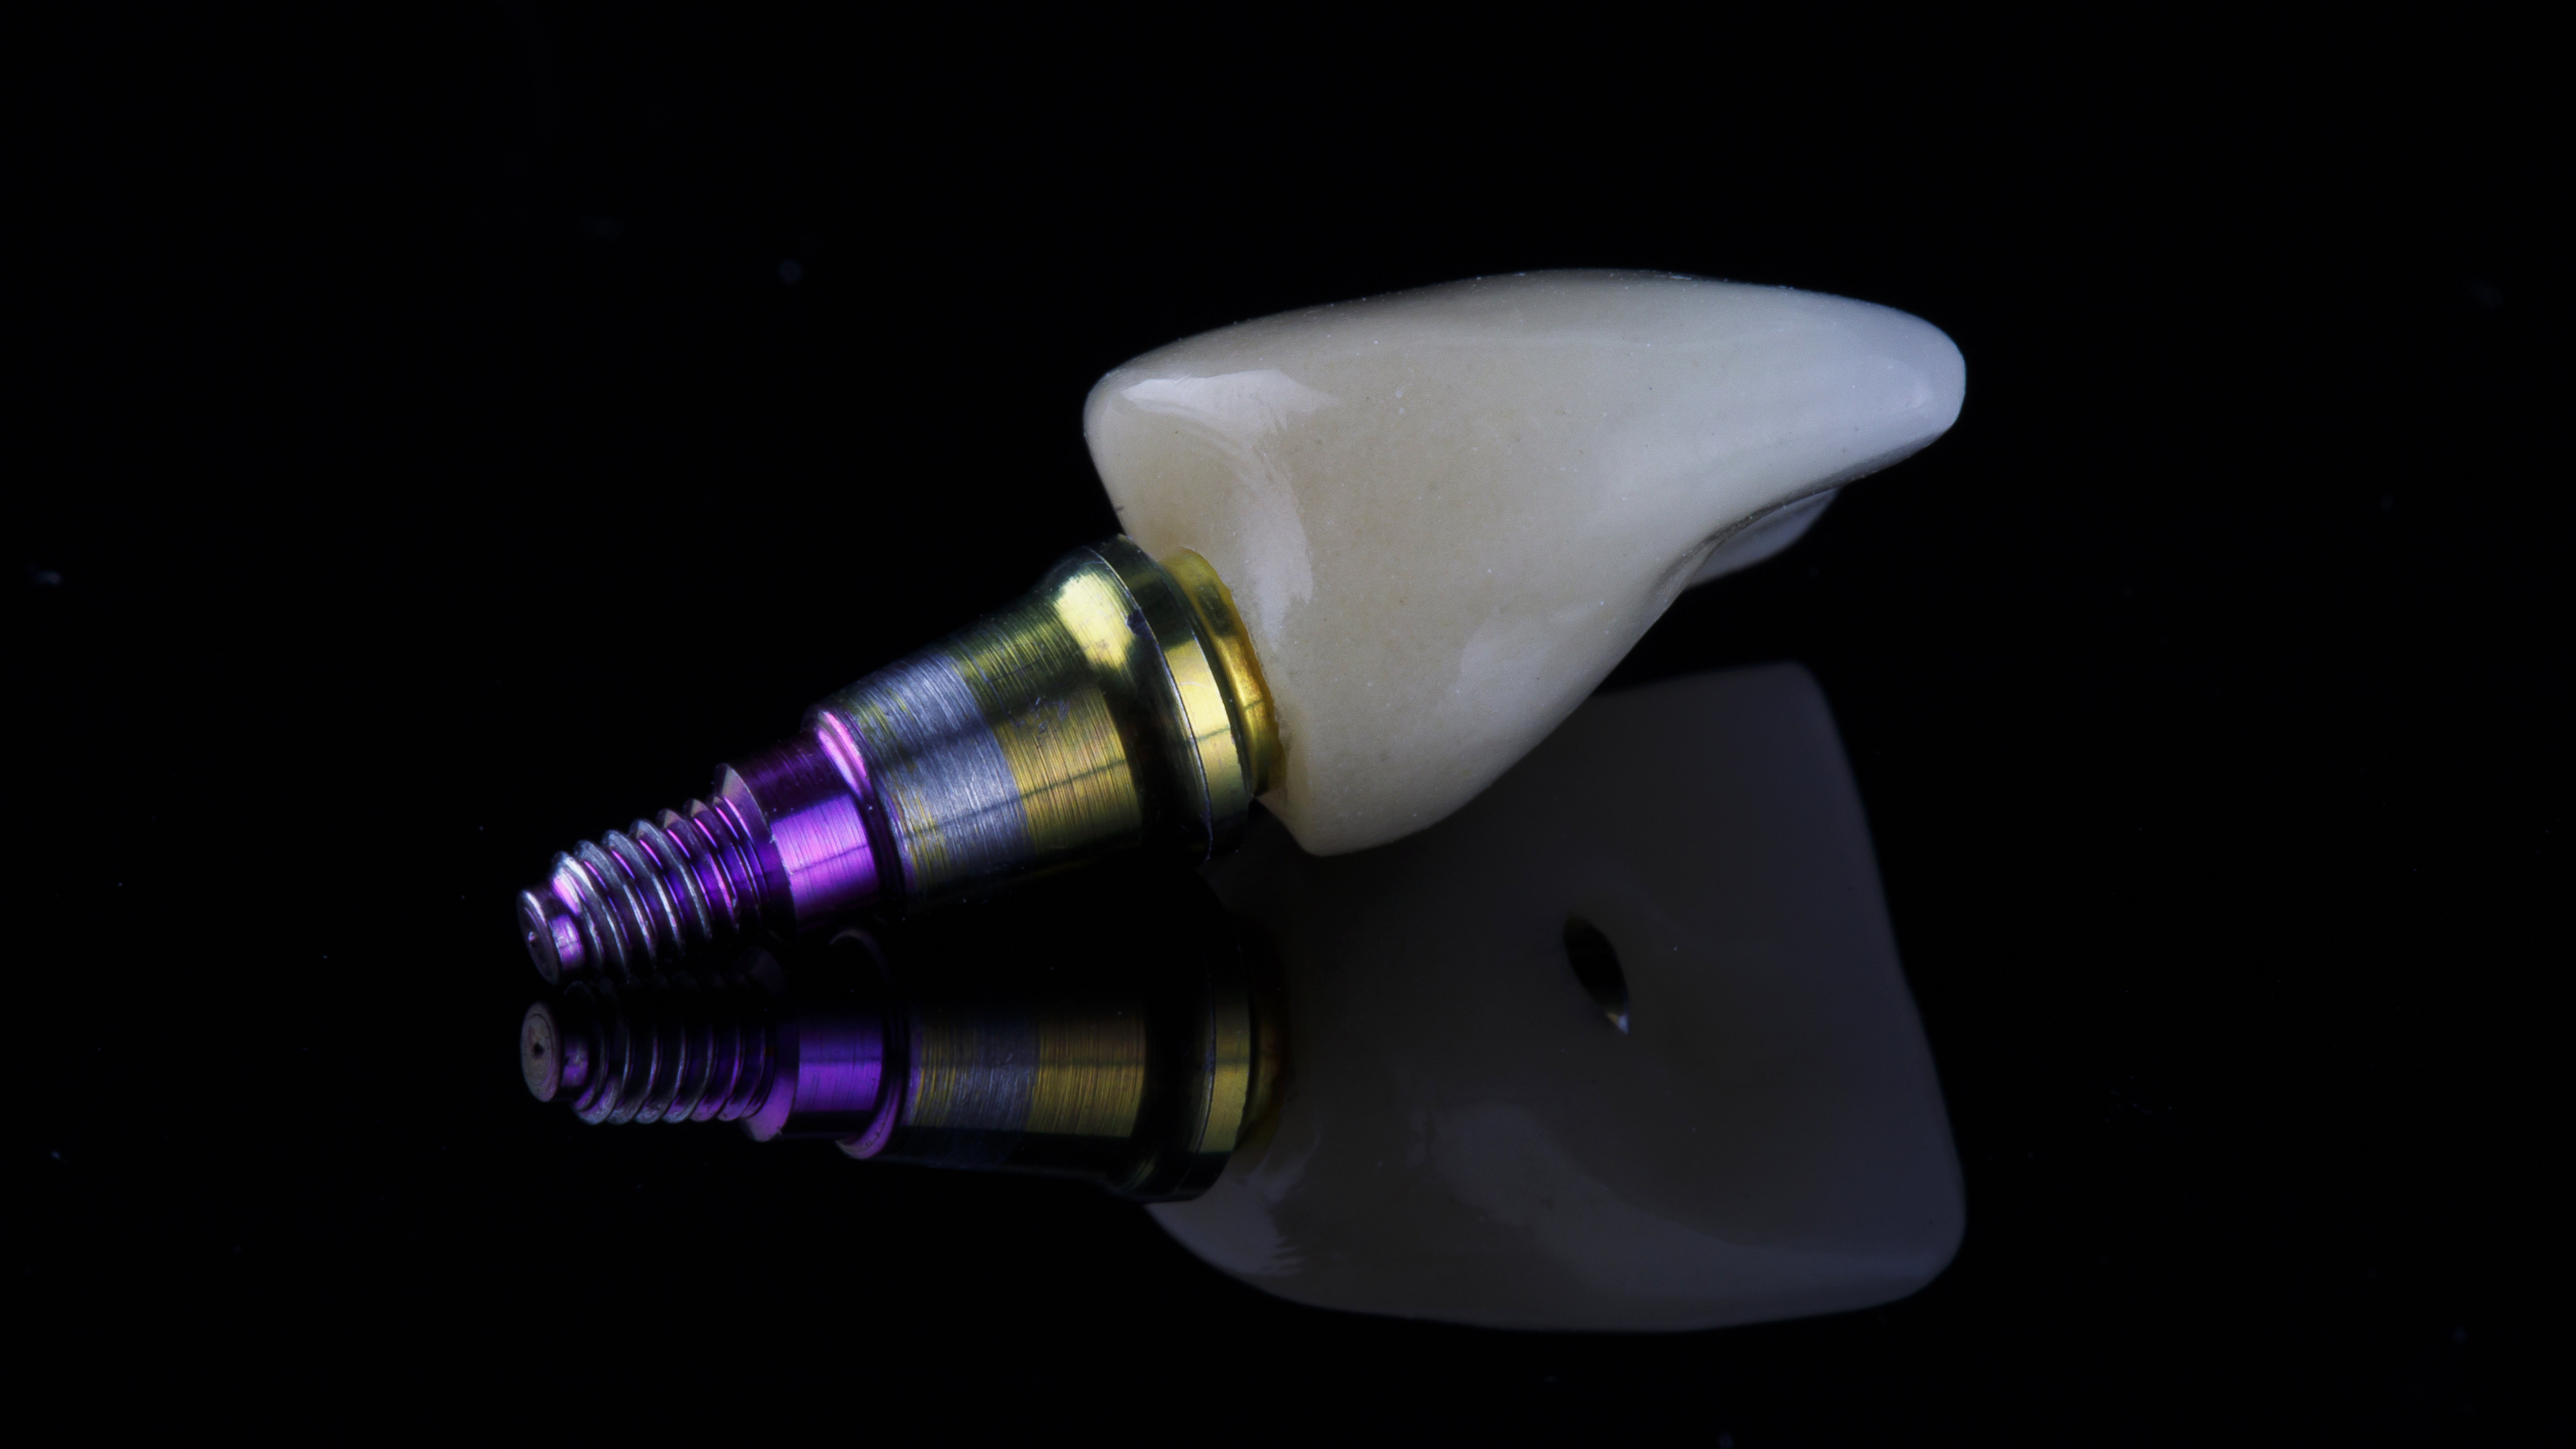 ideal dental crown and special abutment, shot on a black background